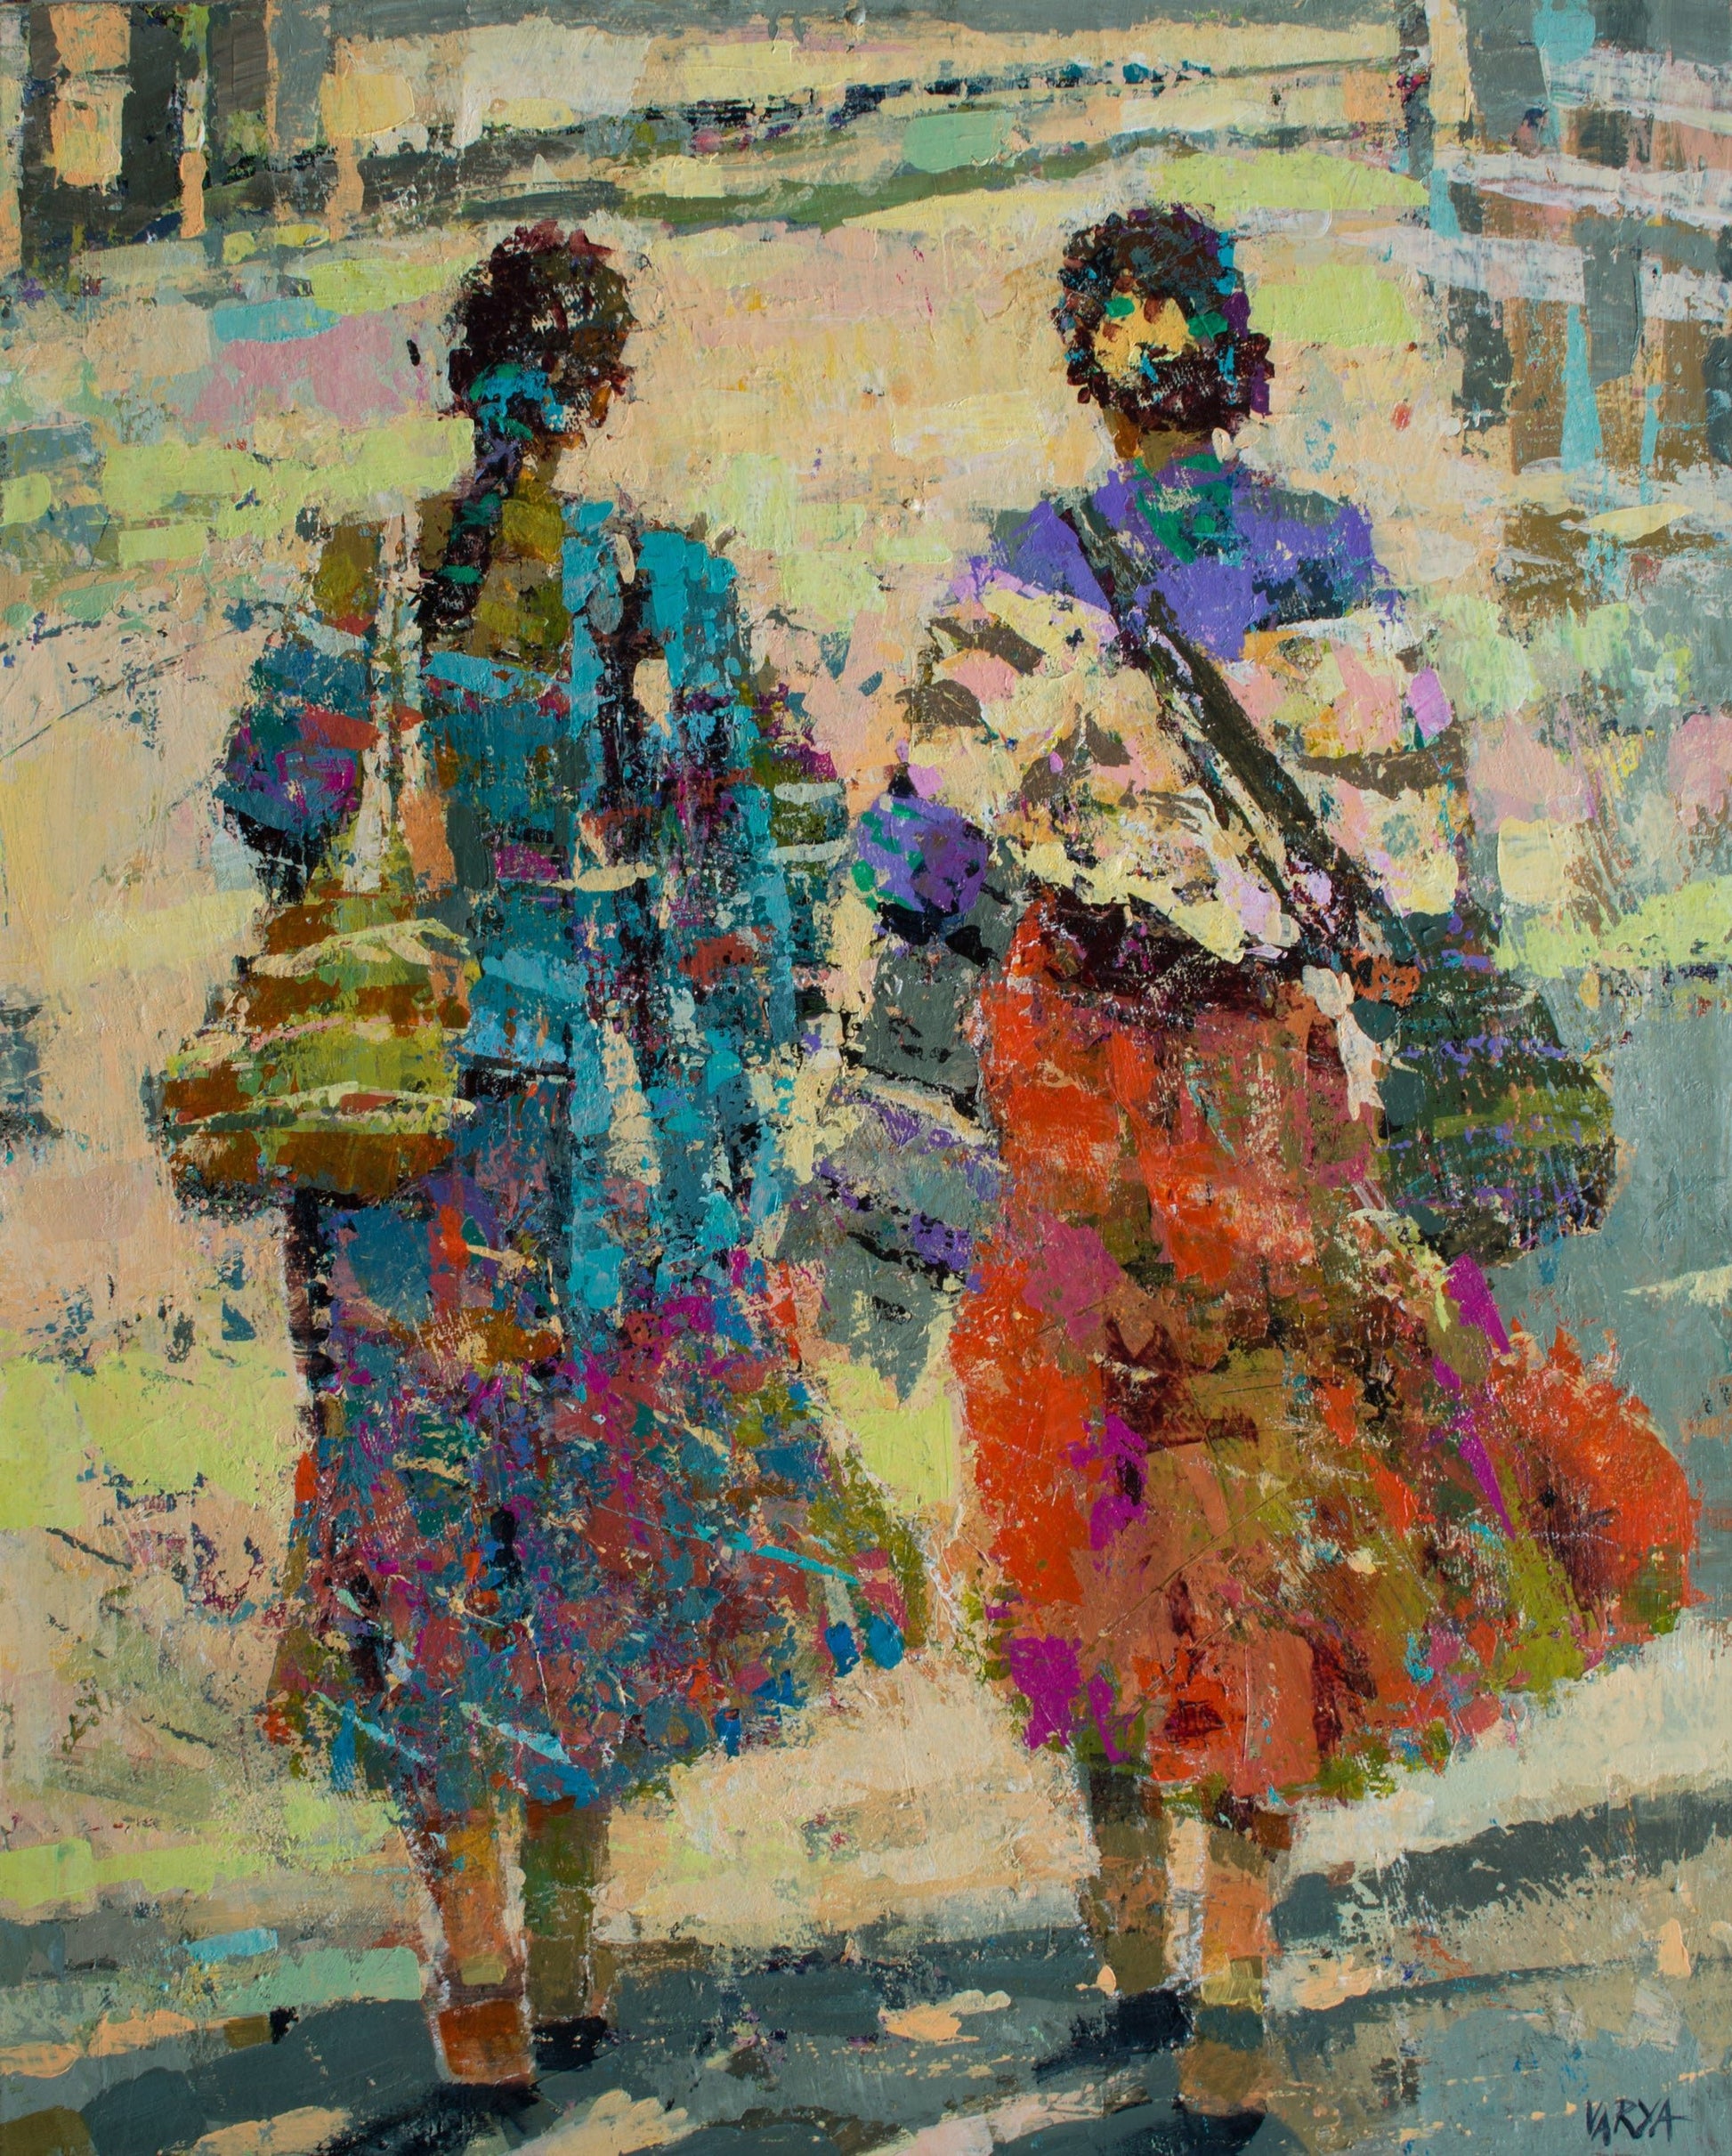 Impressionist painting of women